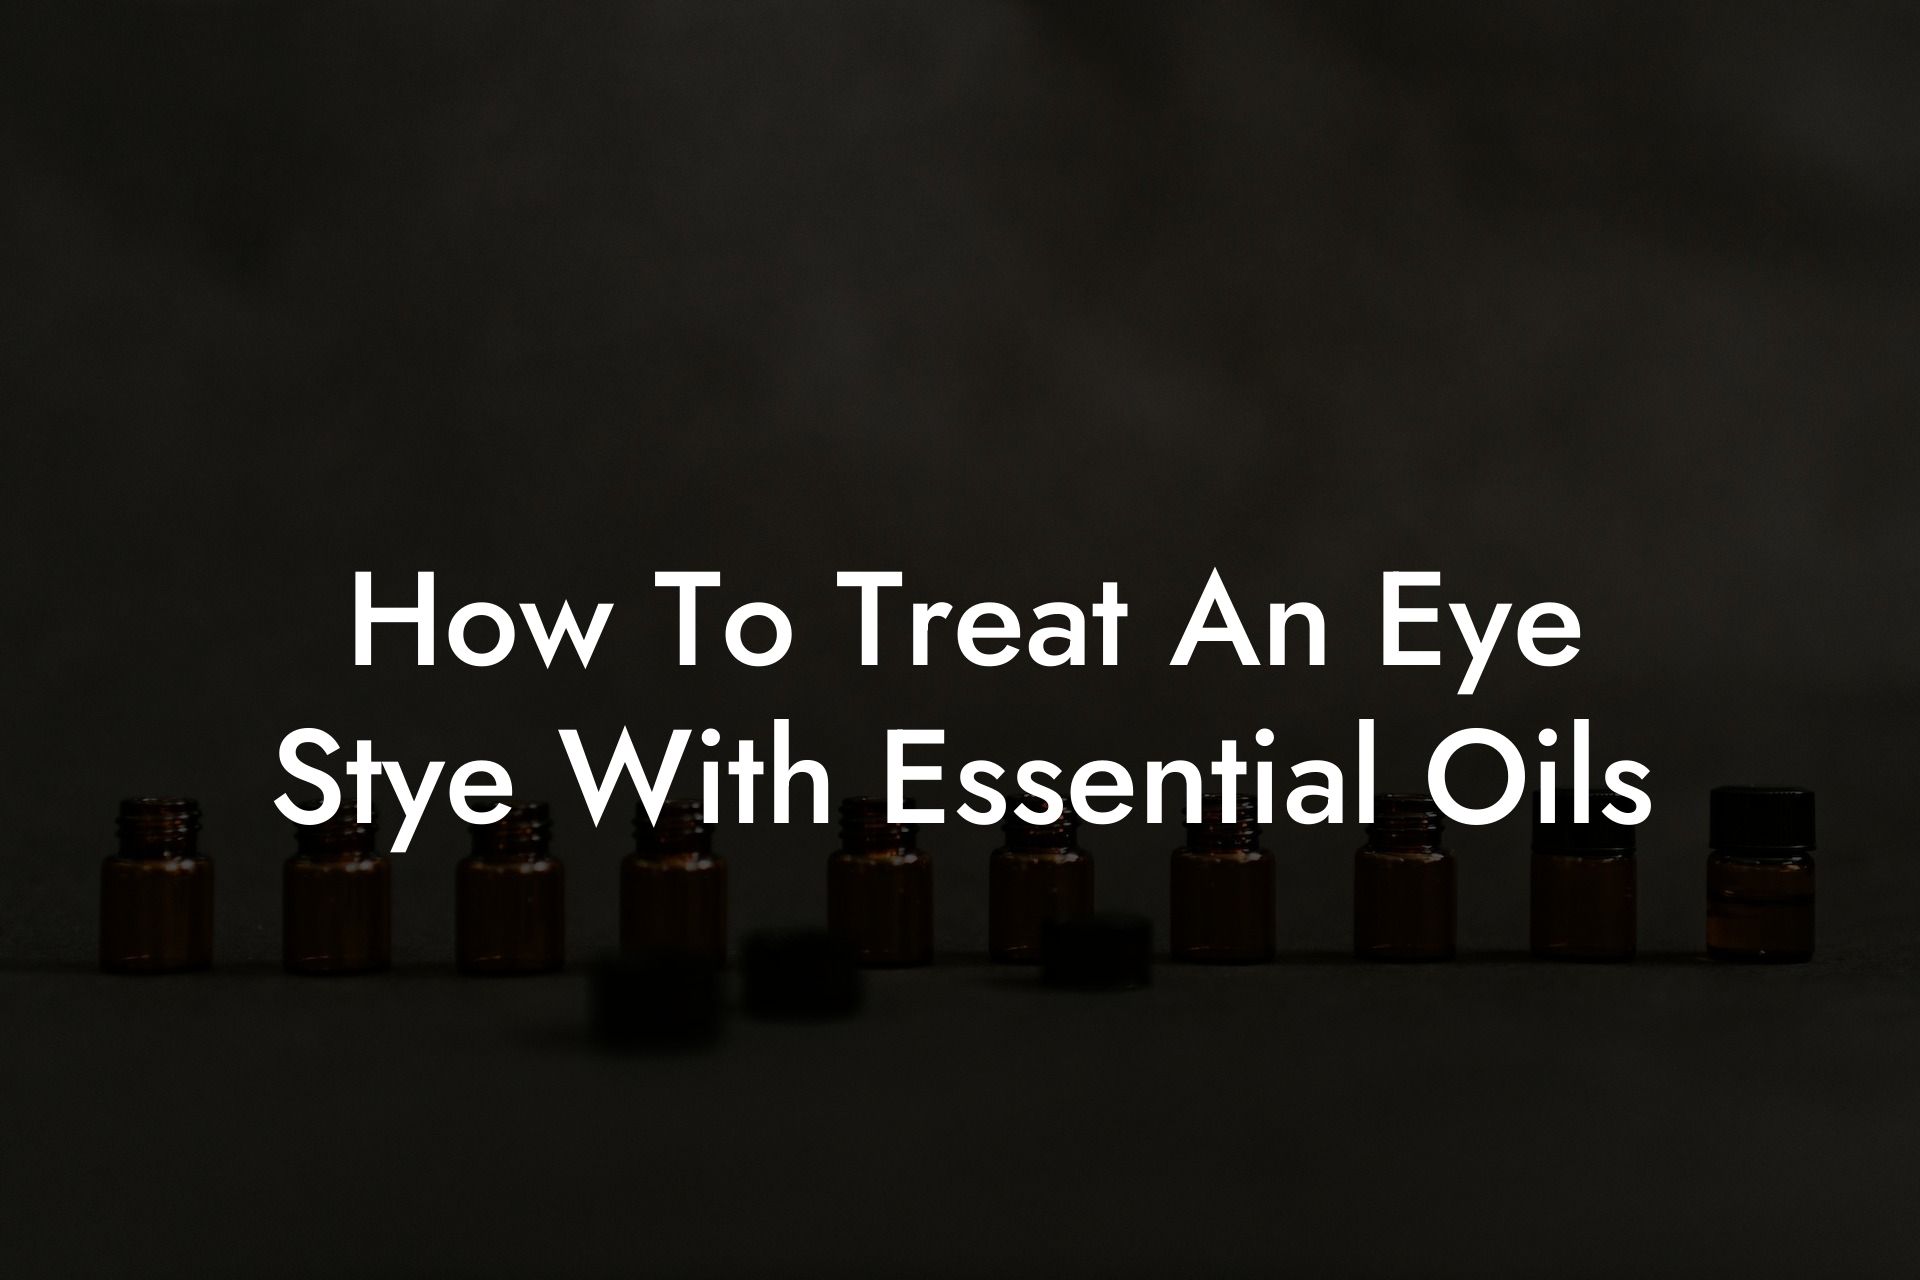 How To Treat An Eye Stye With Essential Oils